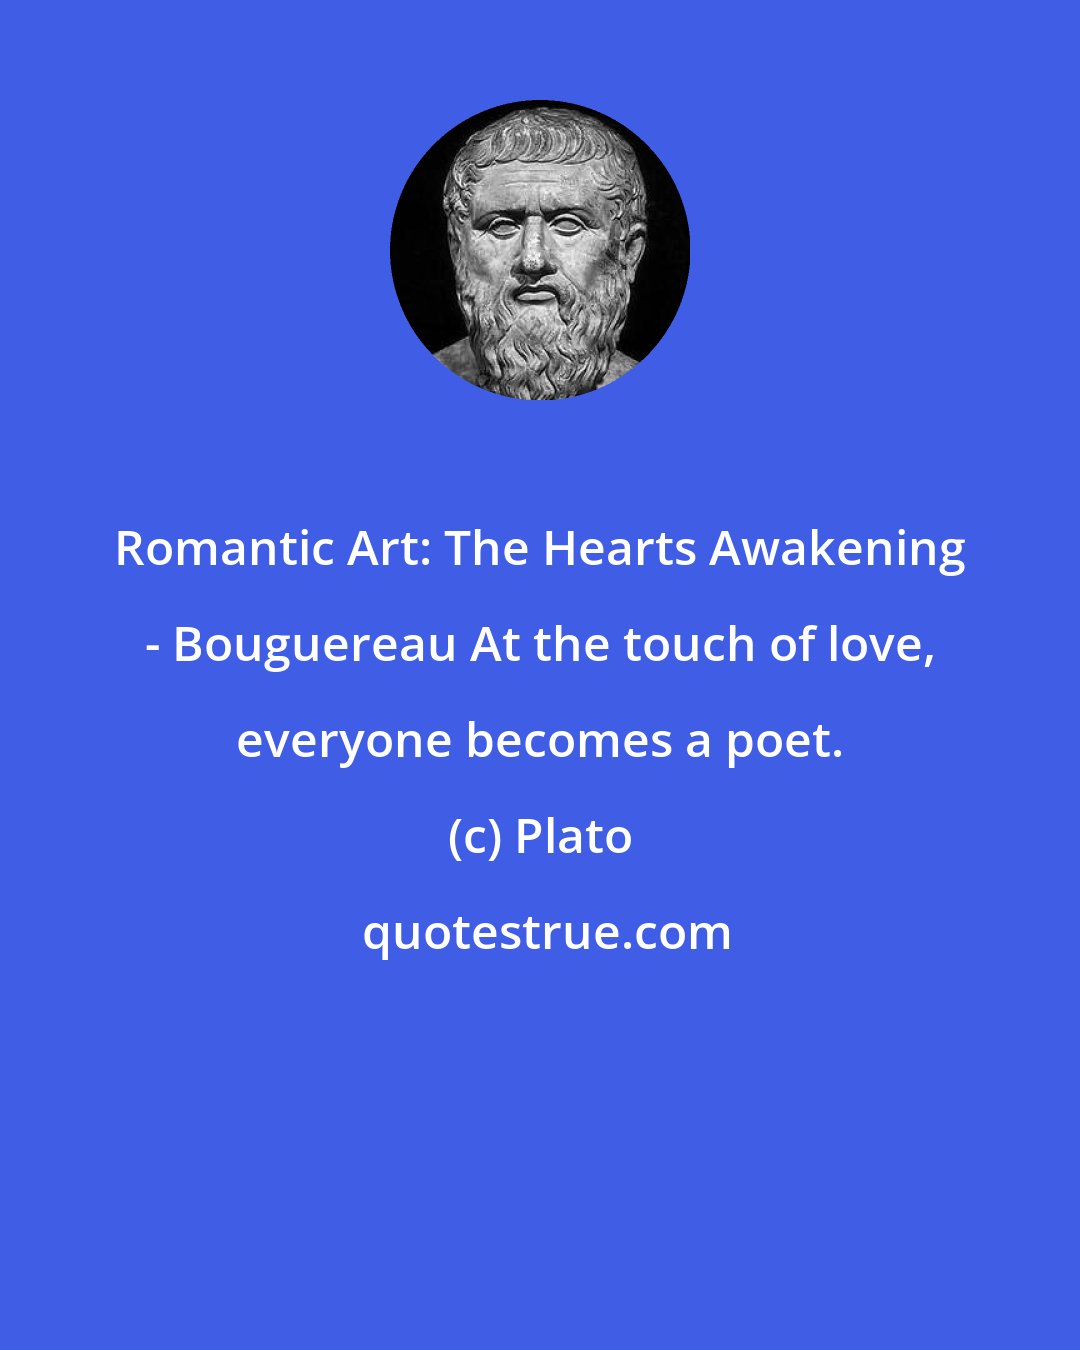 Plato: Romantic Art: The Hearts Awakening - Bouguereau At the touch of love, everyone becomes a poet.